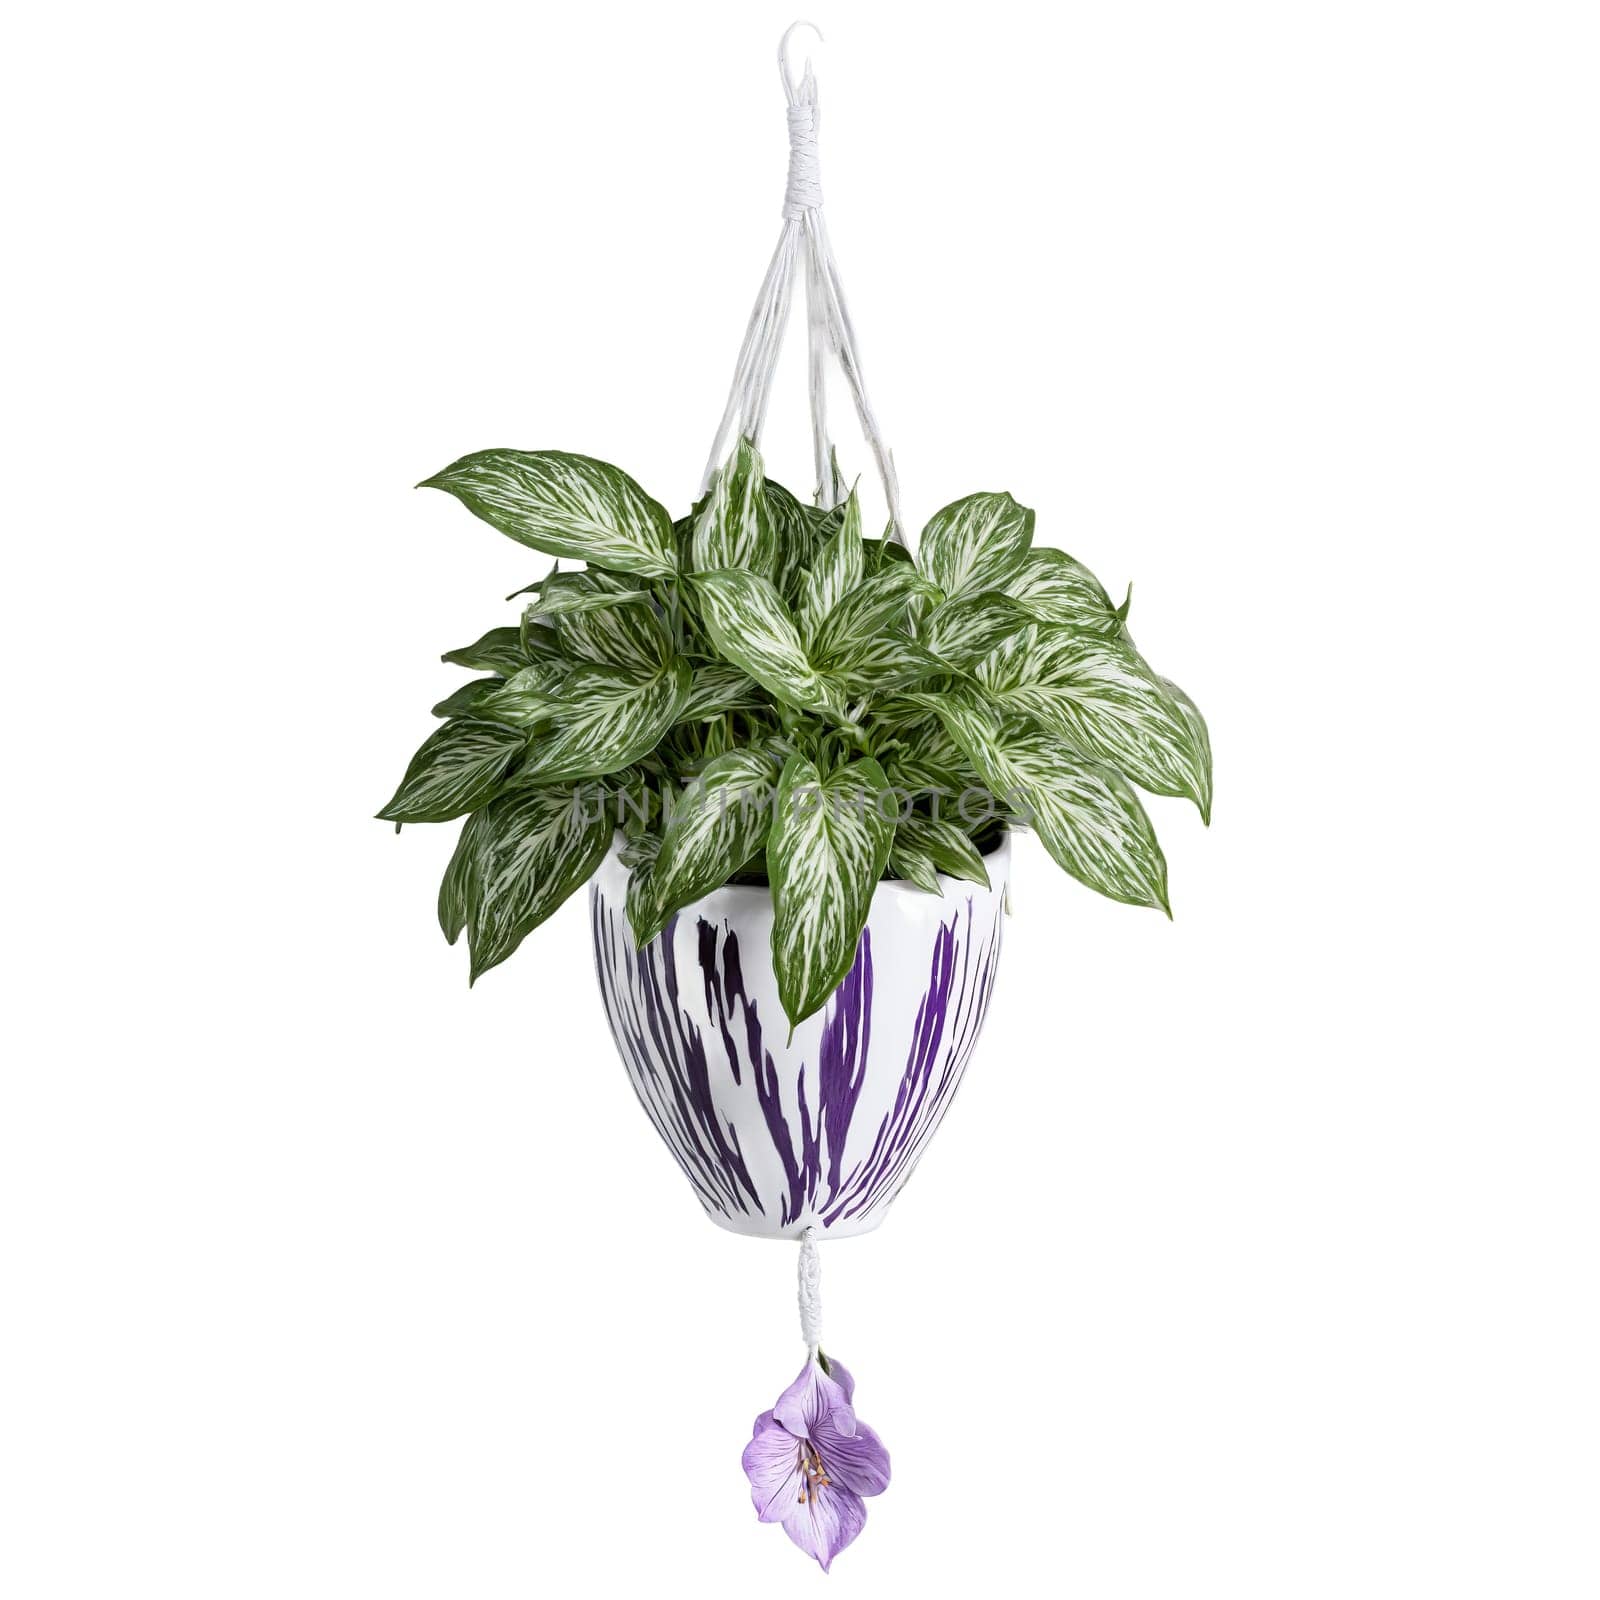 Tradescantia vibrant purple and silver striped leaves trailing from a small white ceramic hanging planter by panophotograph